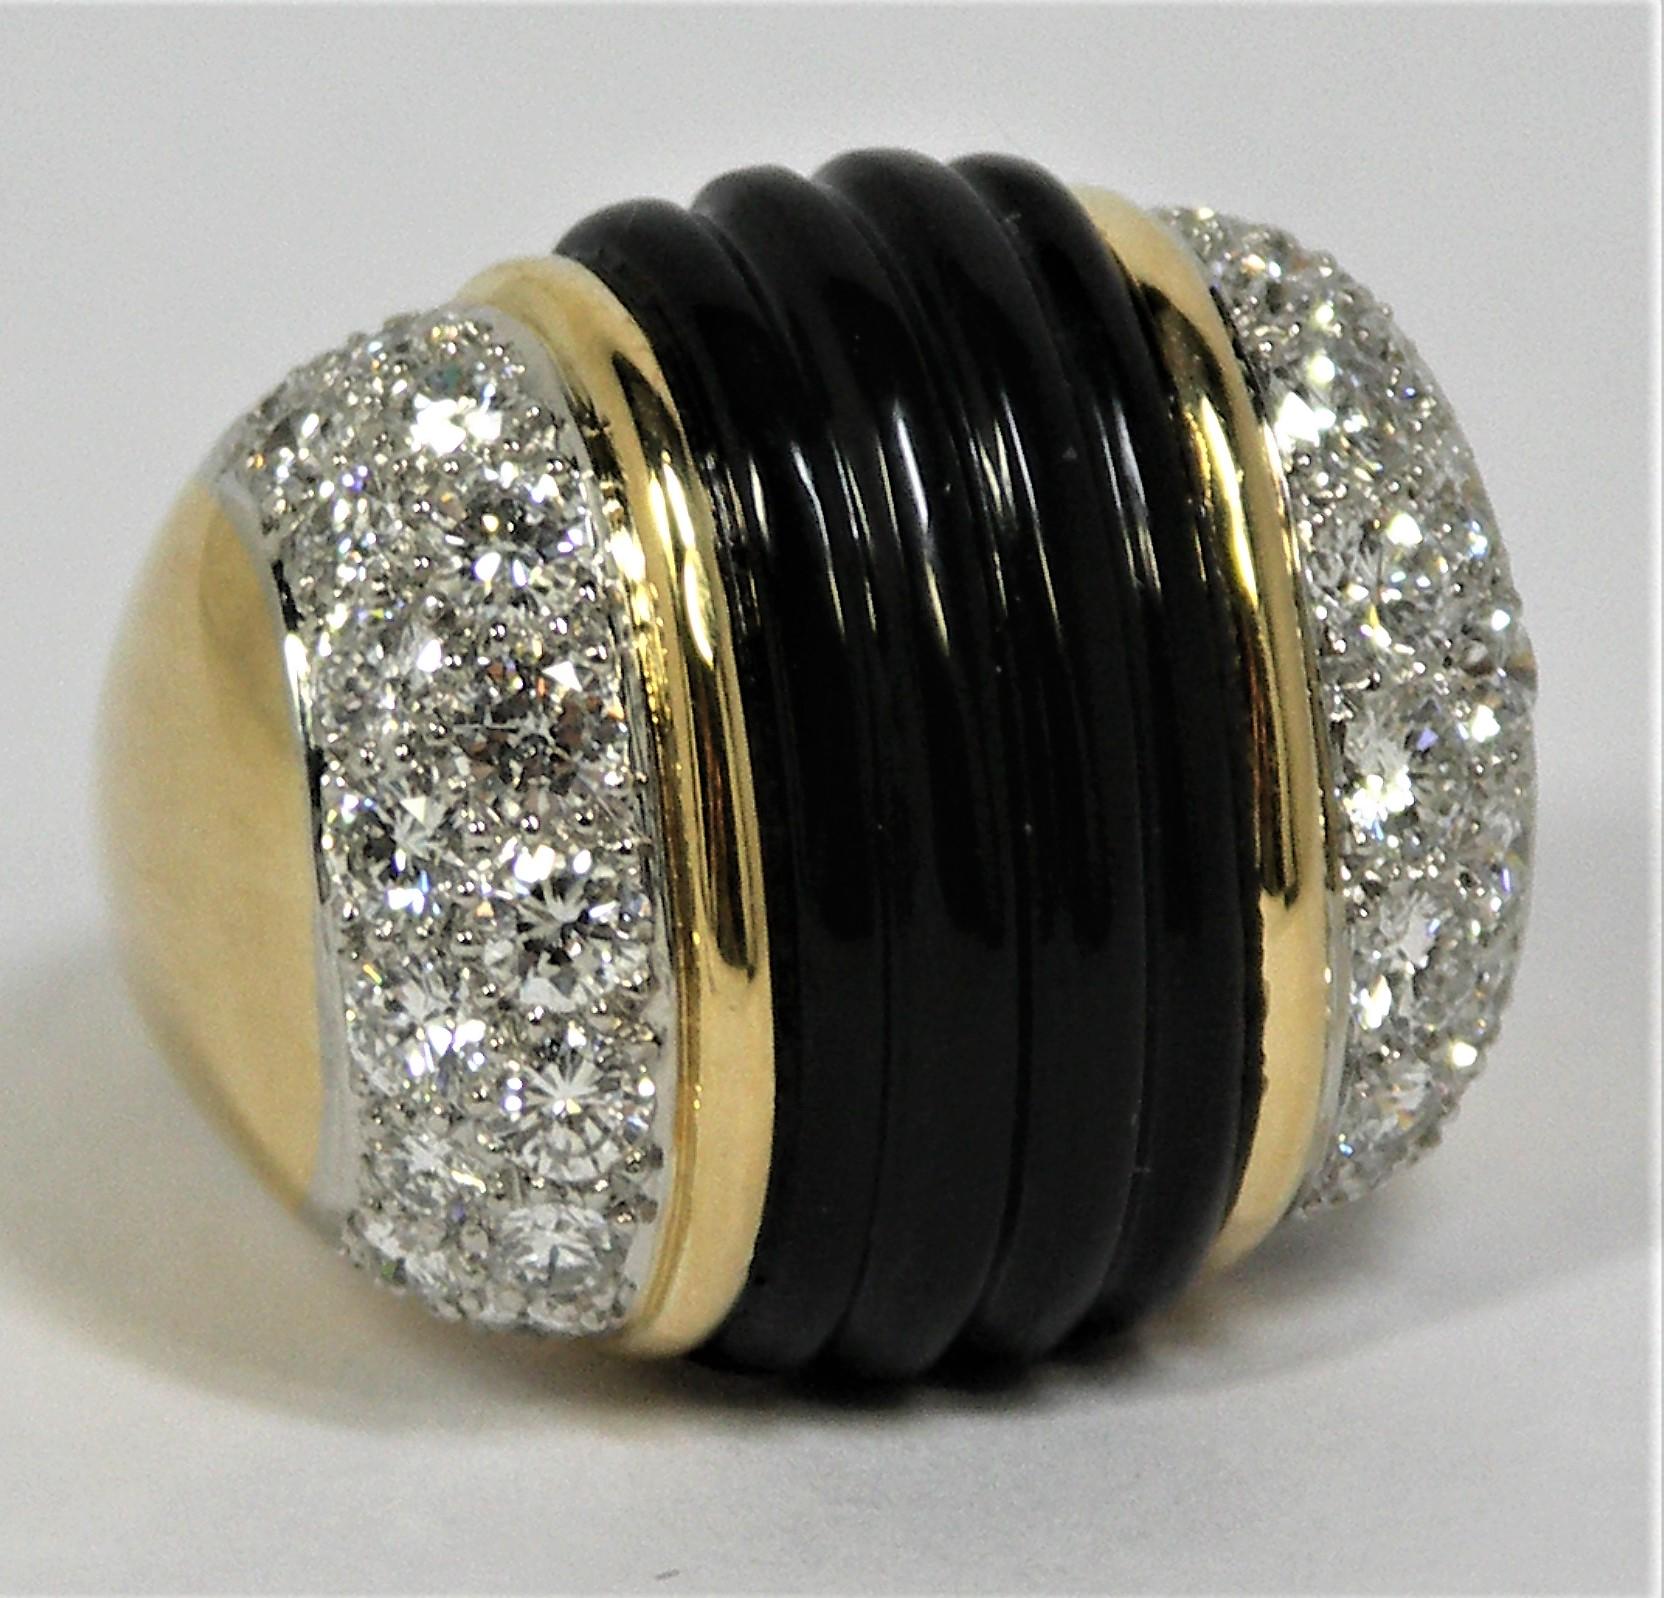 A large scale 18K Yellow Gold statement ring, inset with a center section 
of fluted onyx, and with two Platinum plates set with 38 Round Brilliant Cut Diamonds weighing an approximate total of 4.25Ct of overall F/G Color 
and VS1 Clarity. Measuring